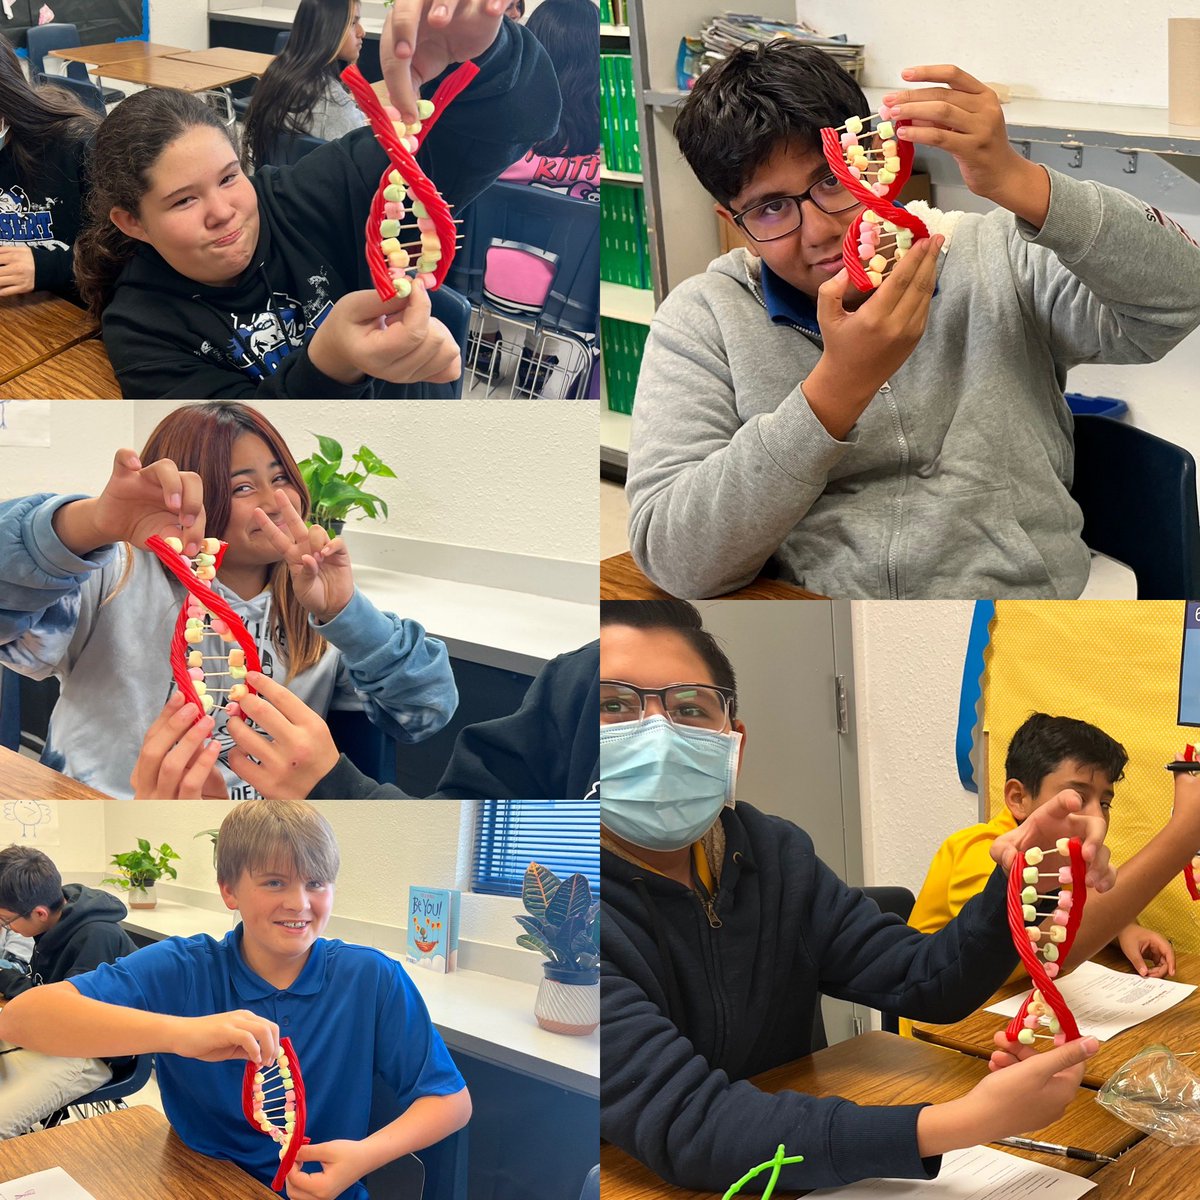 Check out our DNA models 🧬 #ColtNation #NoStraightLineToSuccess #TeamSISD